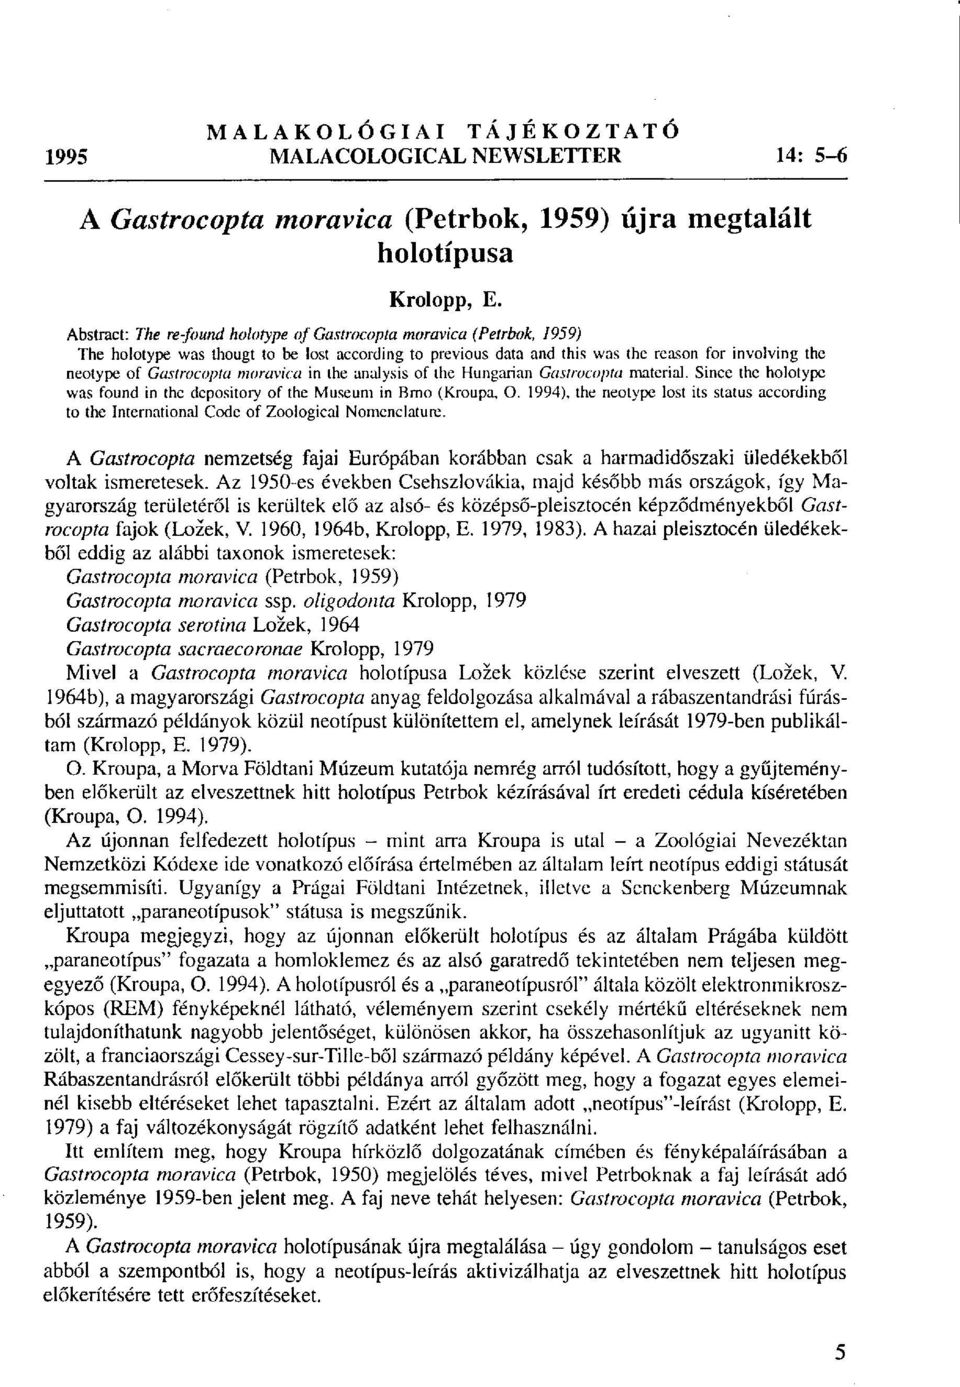 moravica in the analysis of the Hungarian Gastrocopta material. Since the holotype was found in the depository of the Museum in Brno (Kroupa, O.